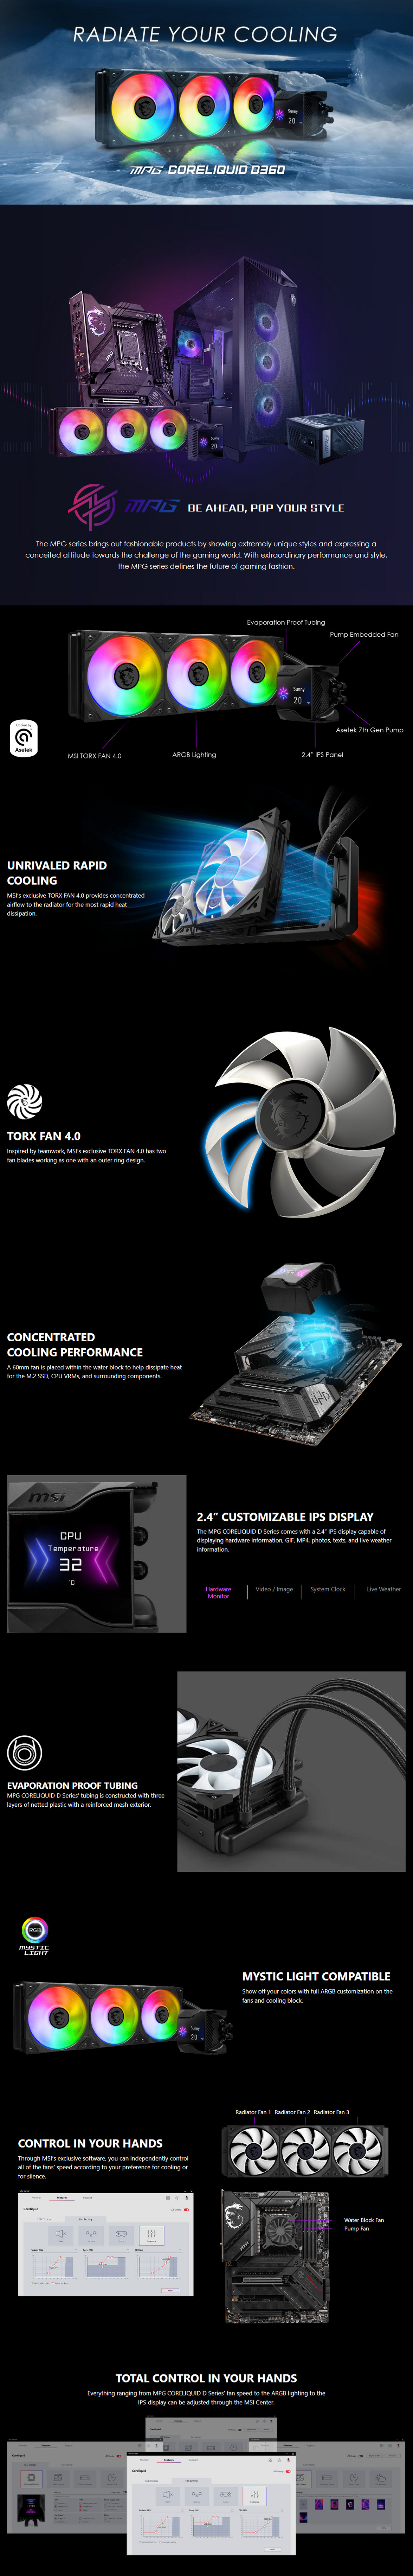 A large marketing image providing additional information about the product MSI MPG Coreliquid D360 360mm AIO Liquid Cooler - Additional alt info not provided